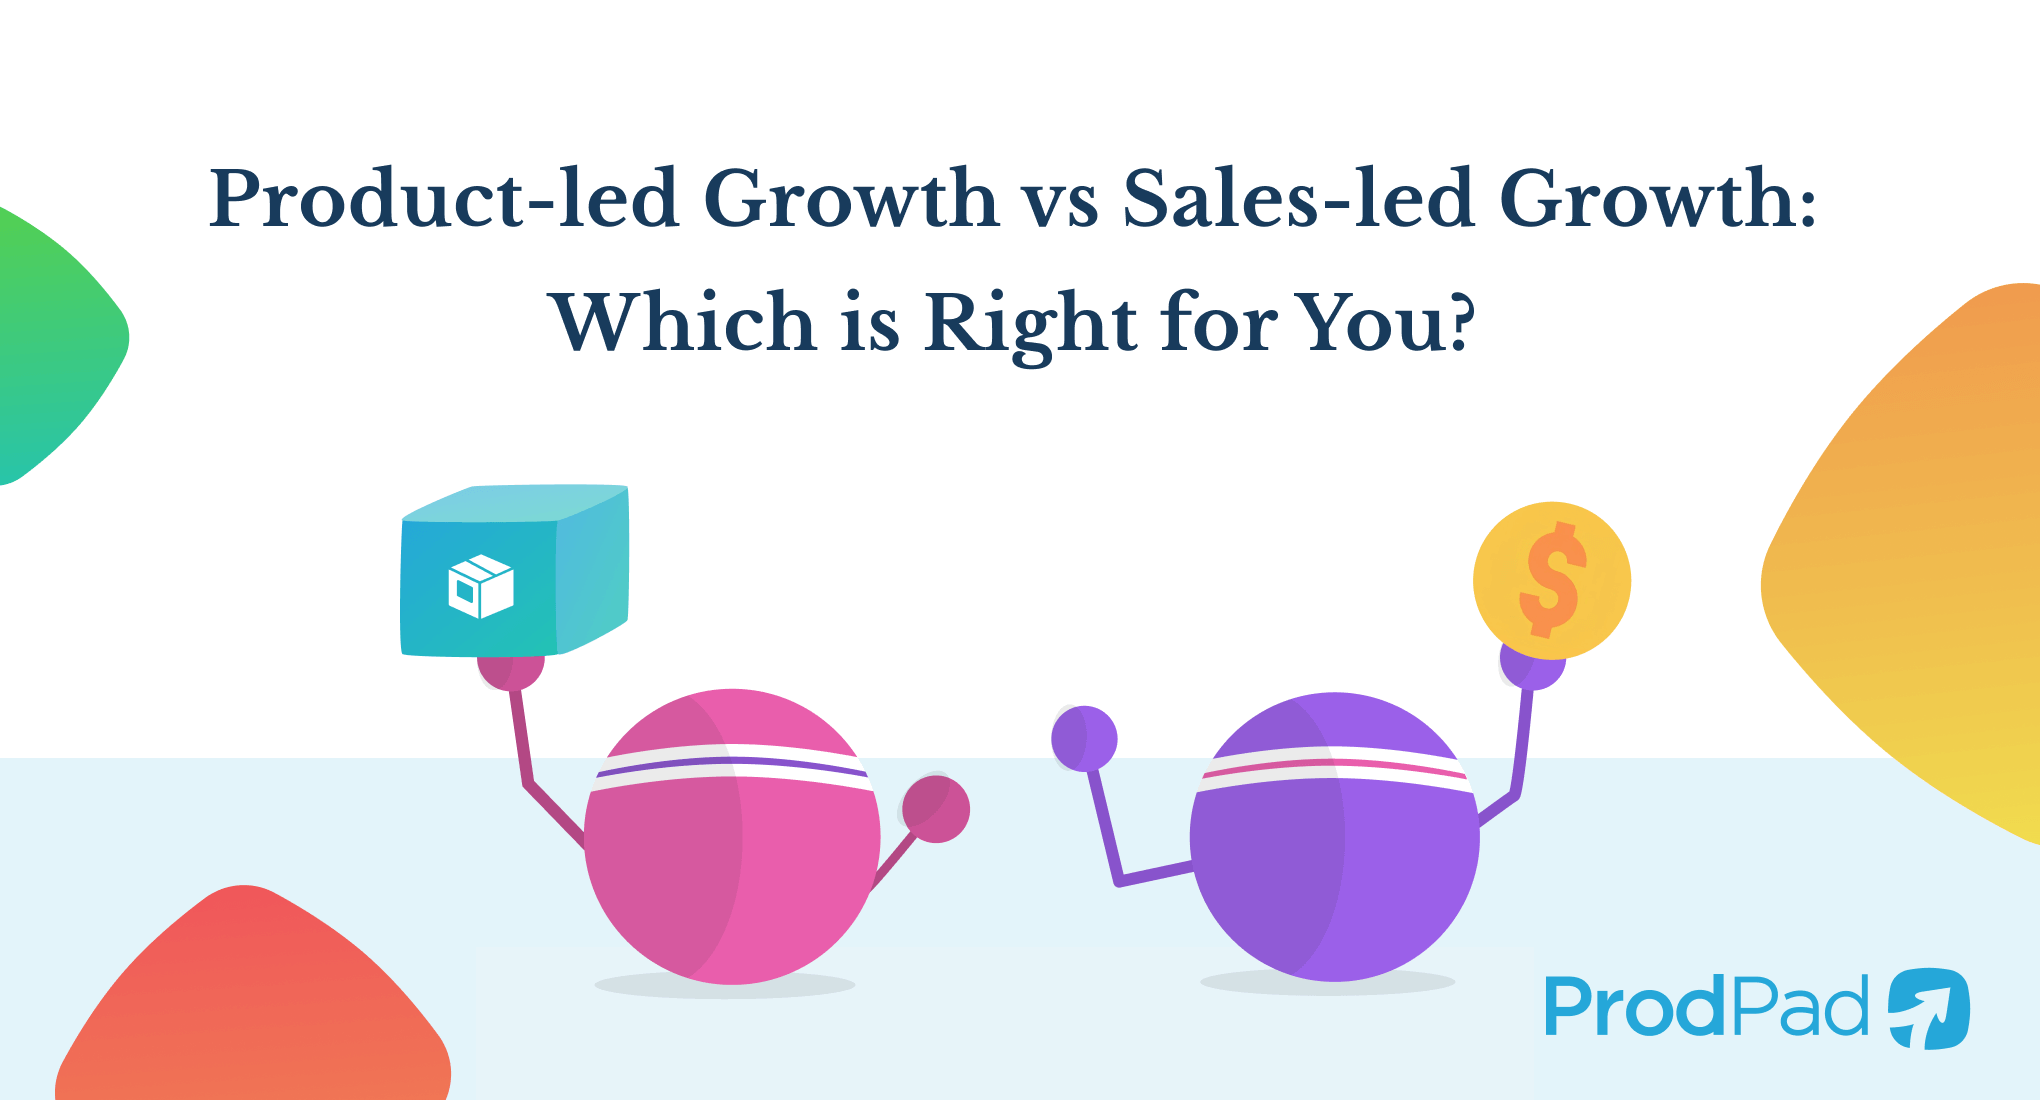 Product-led growth vs. sales-led growth (29 minute read)